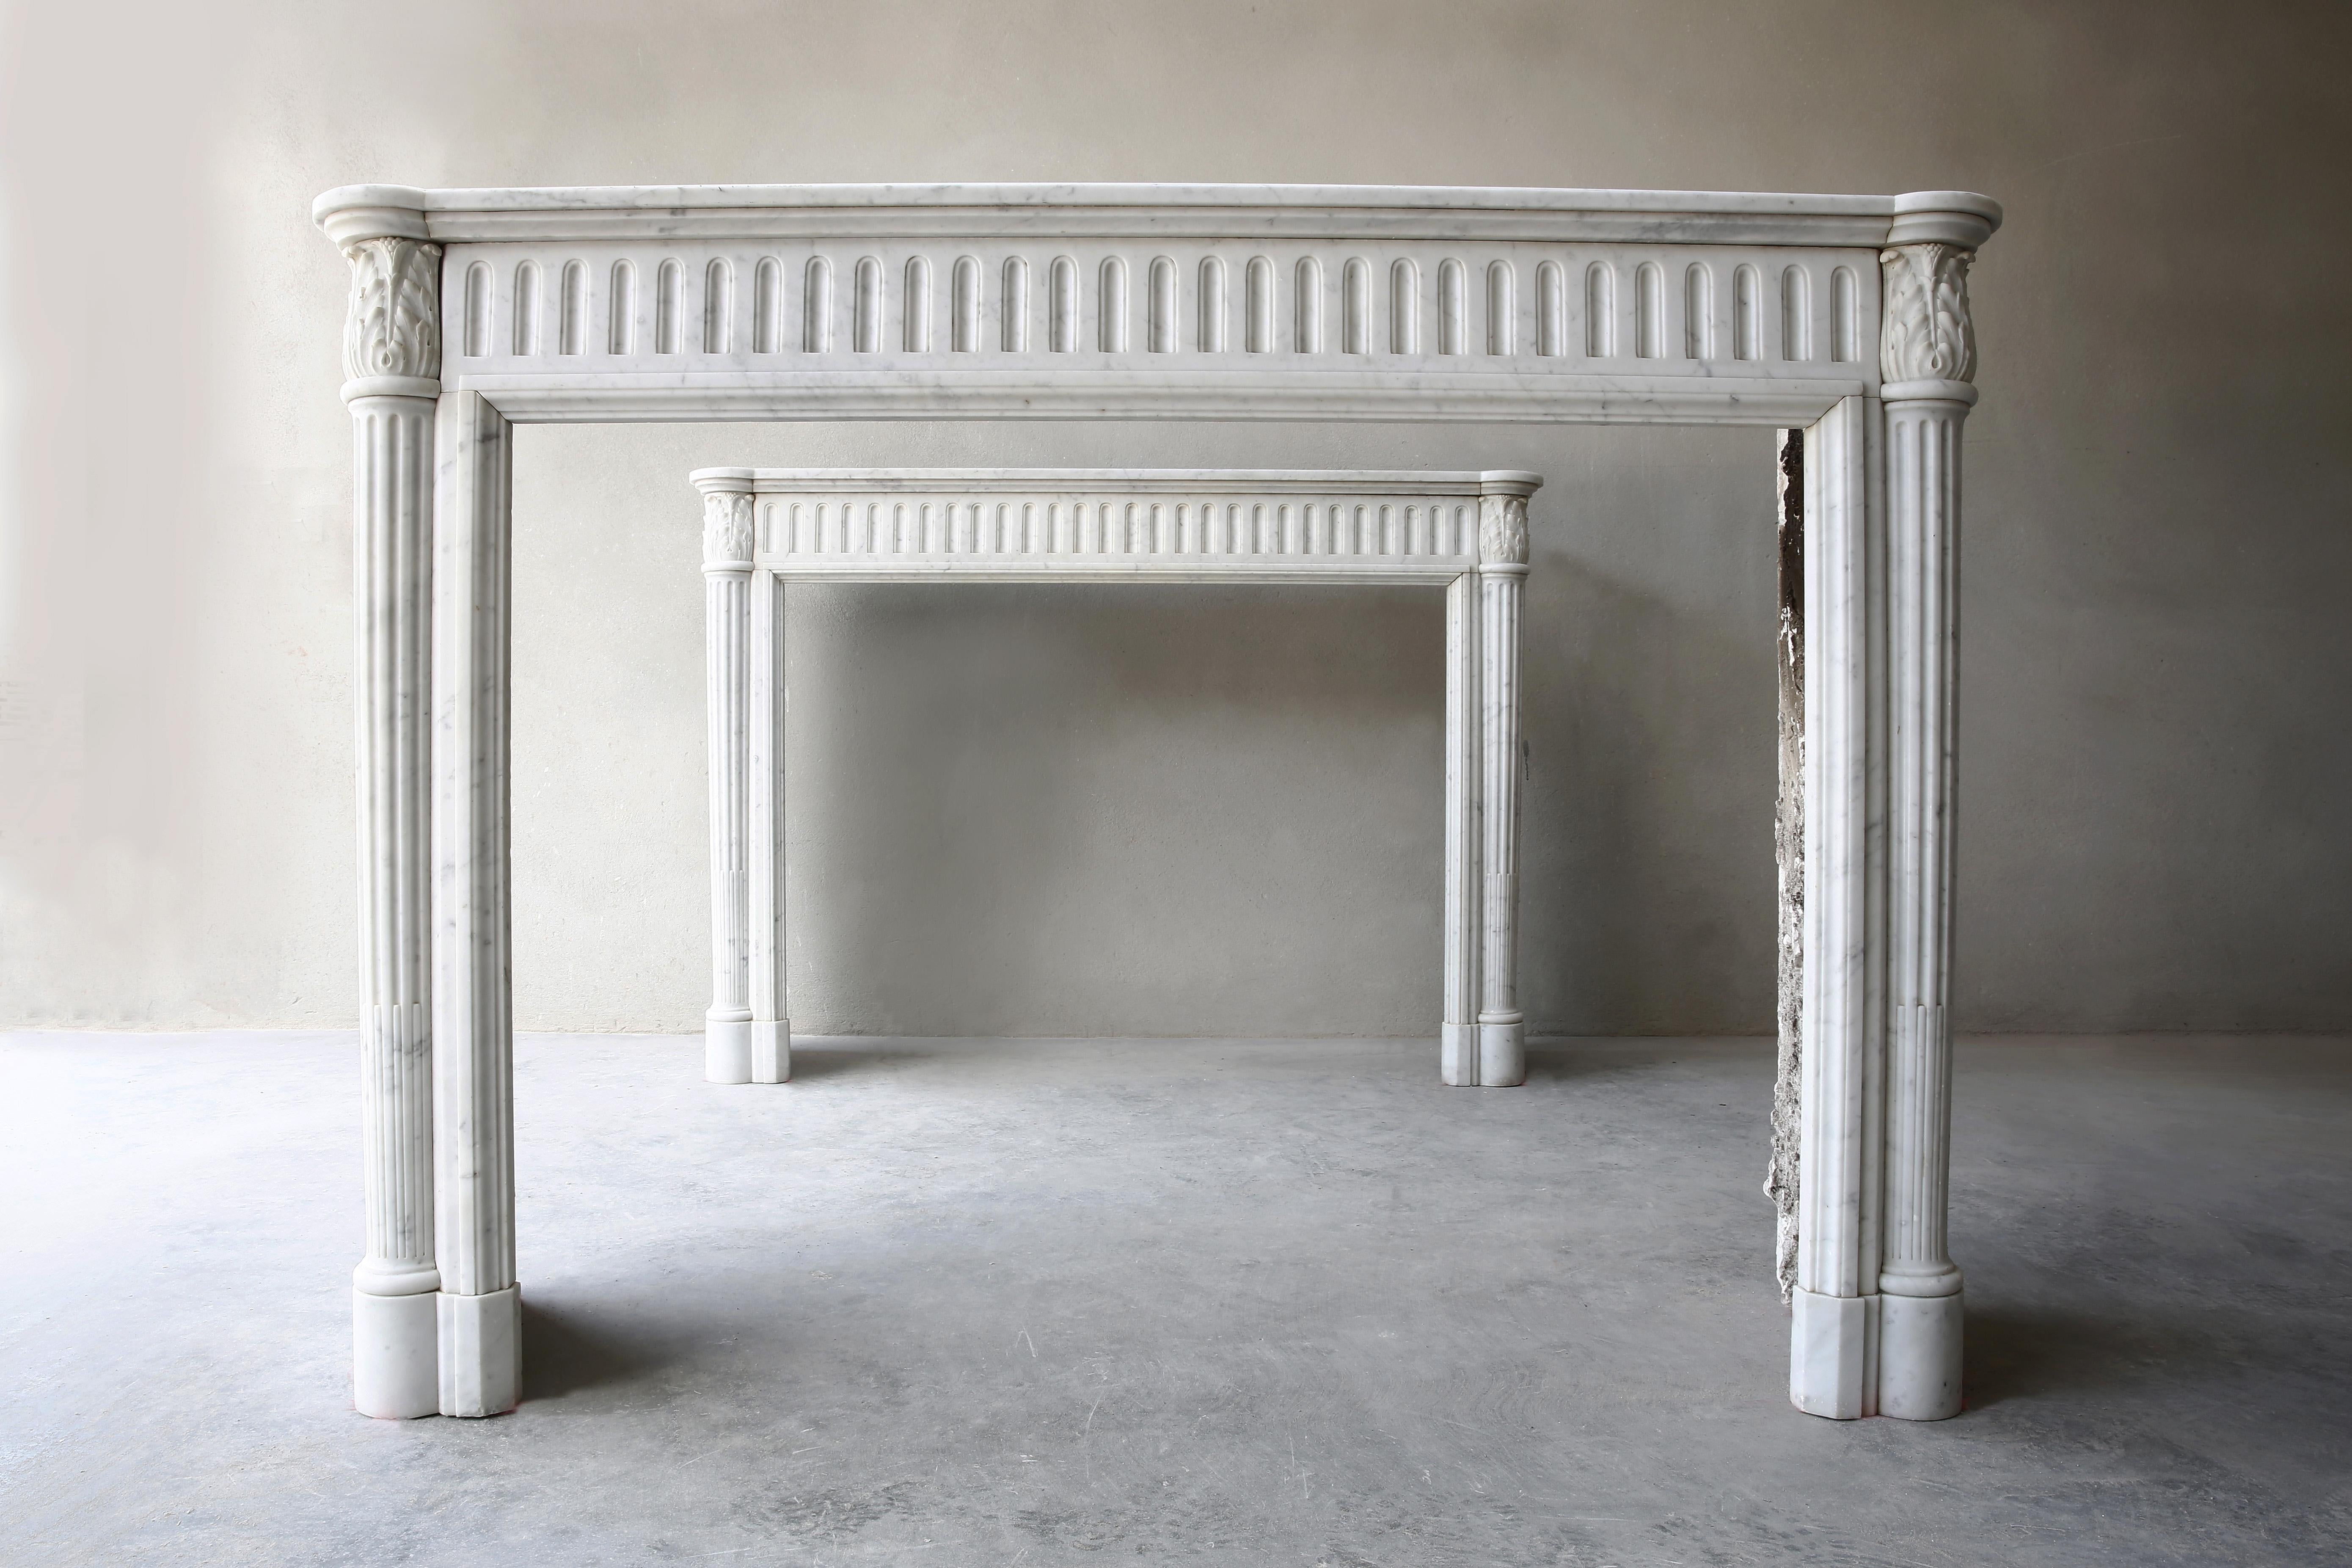 A unique couple of identical antique Carrara marble fireplaces ! 
These two mantel pieces are from Paris - France.
Provenance is about 1860-1890 and are in style of Louis XVI. 
These special fireplaces are available per couple.